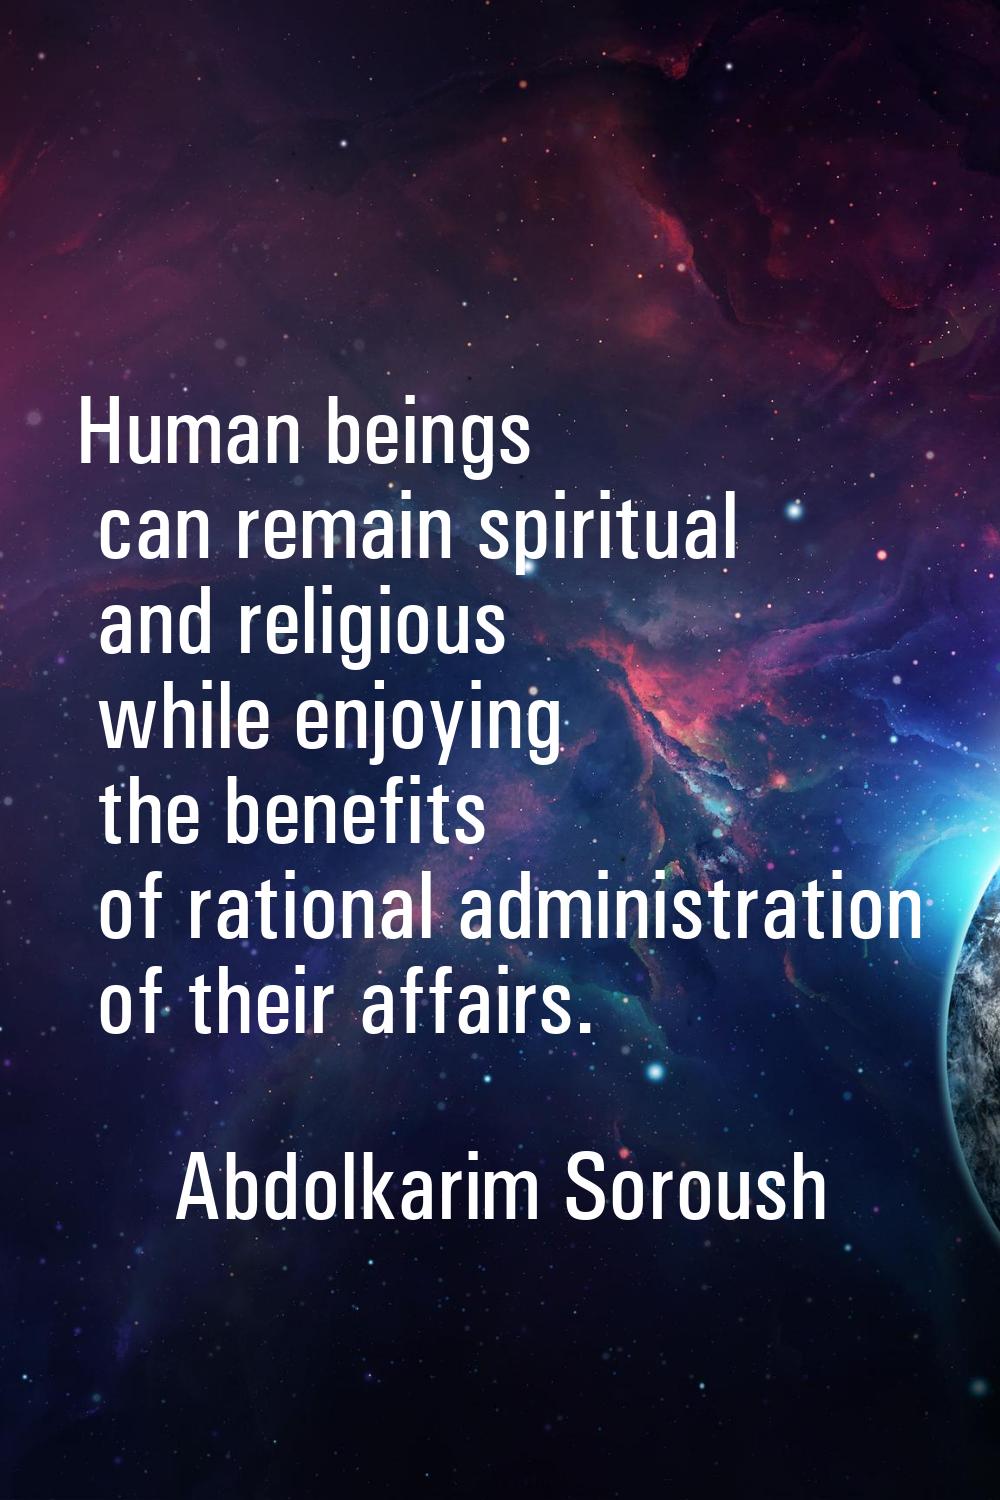 Human beings can remain spiritual and religious while enjoying the benefits of rational administrat